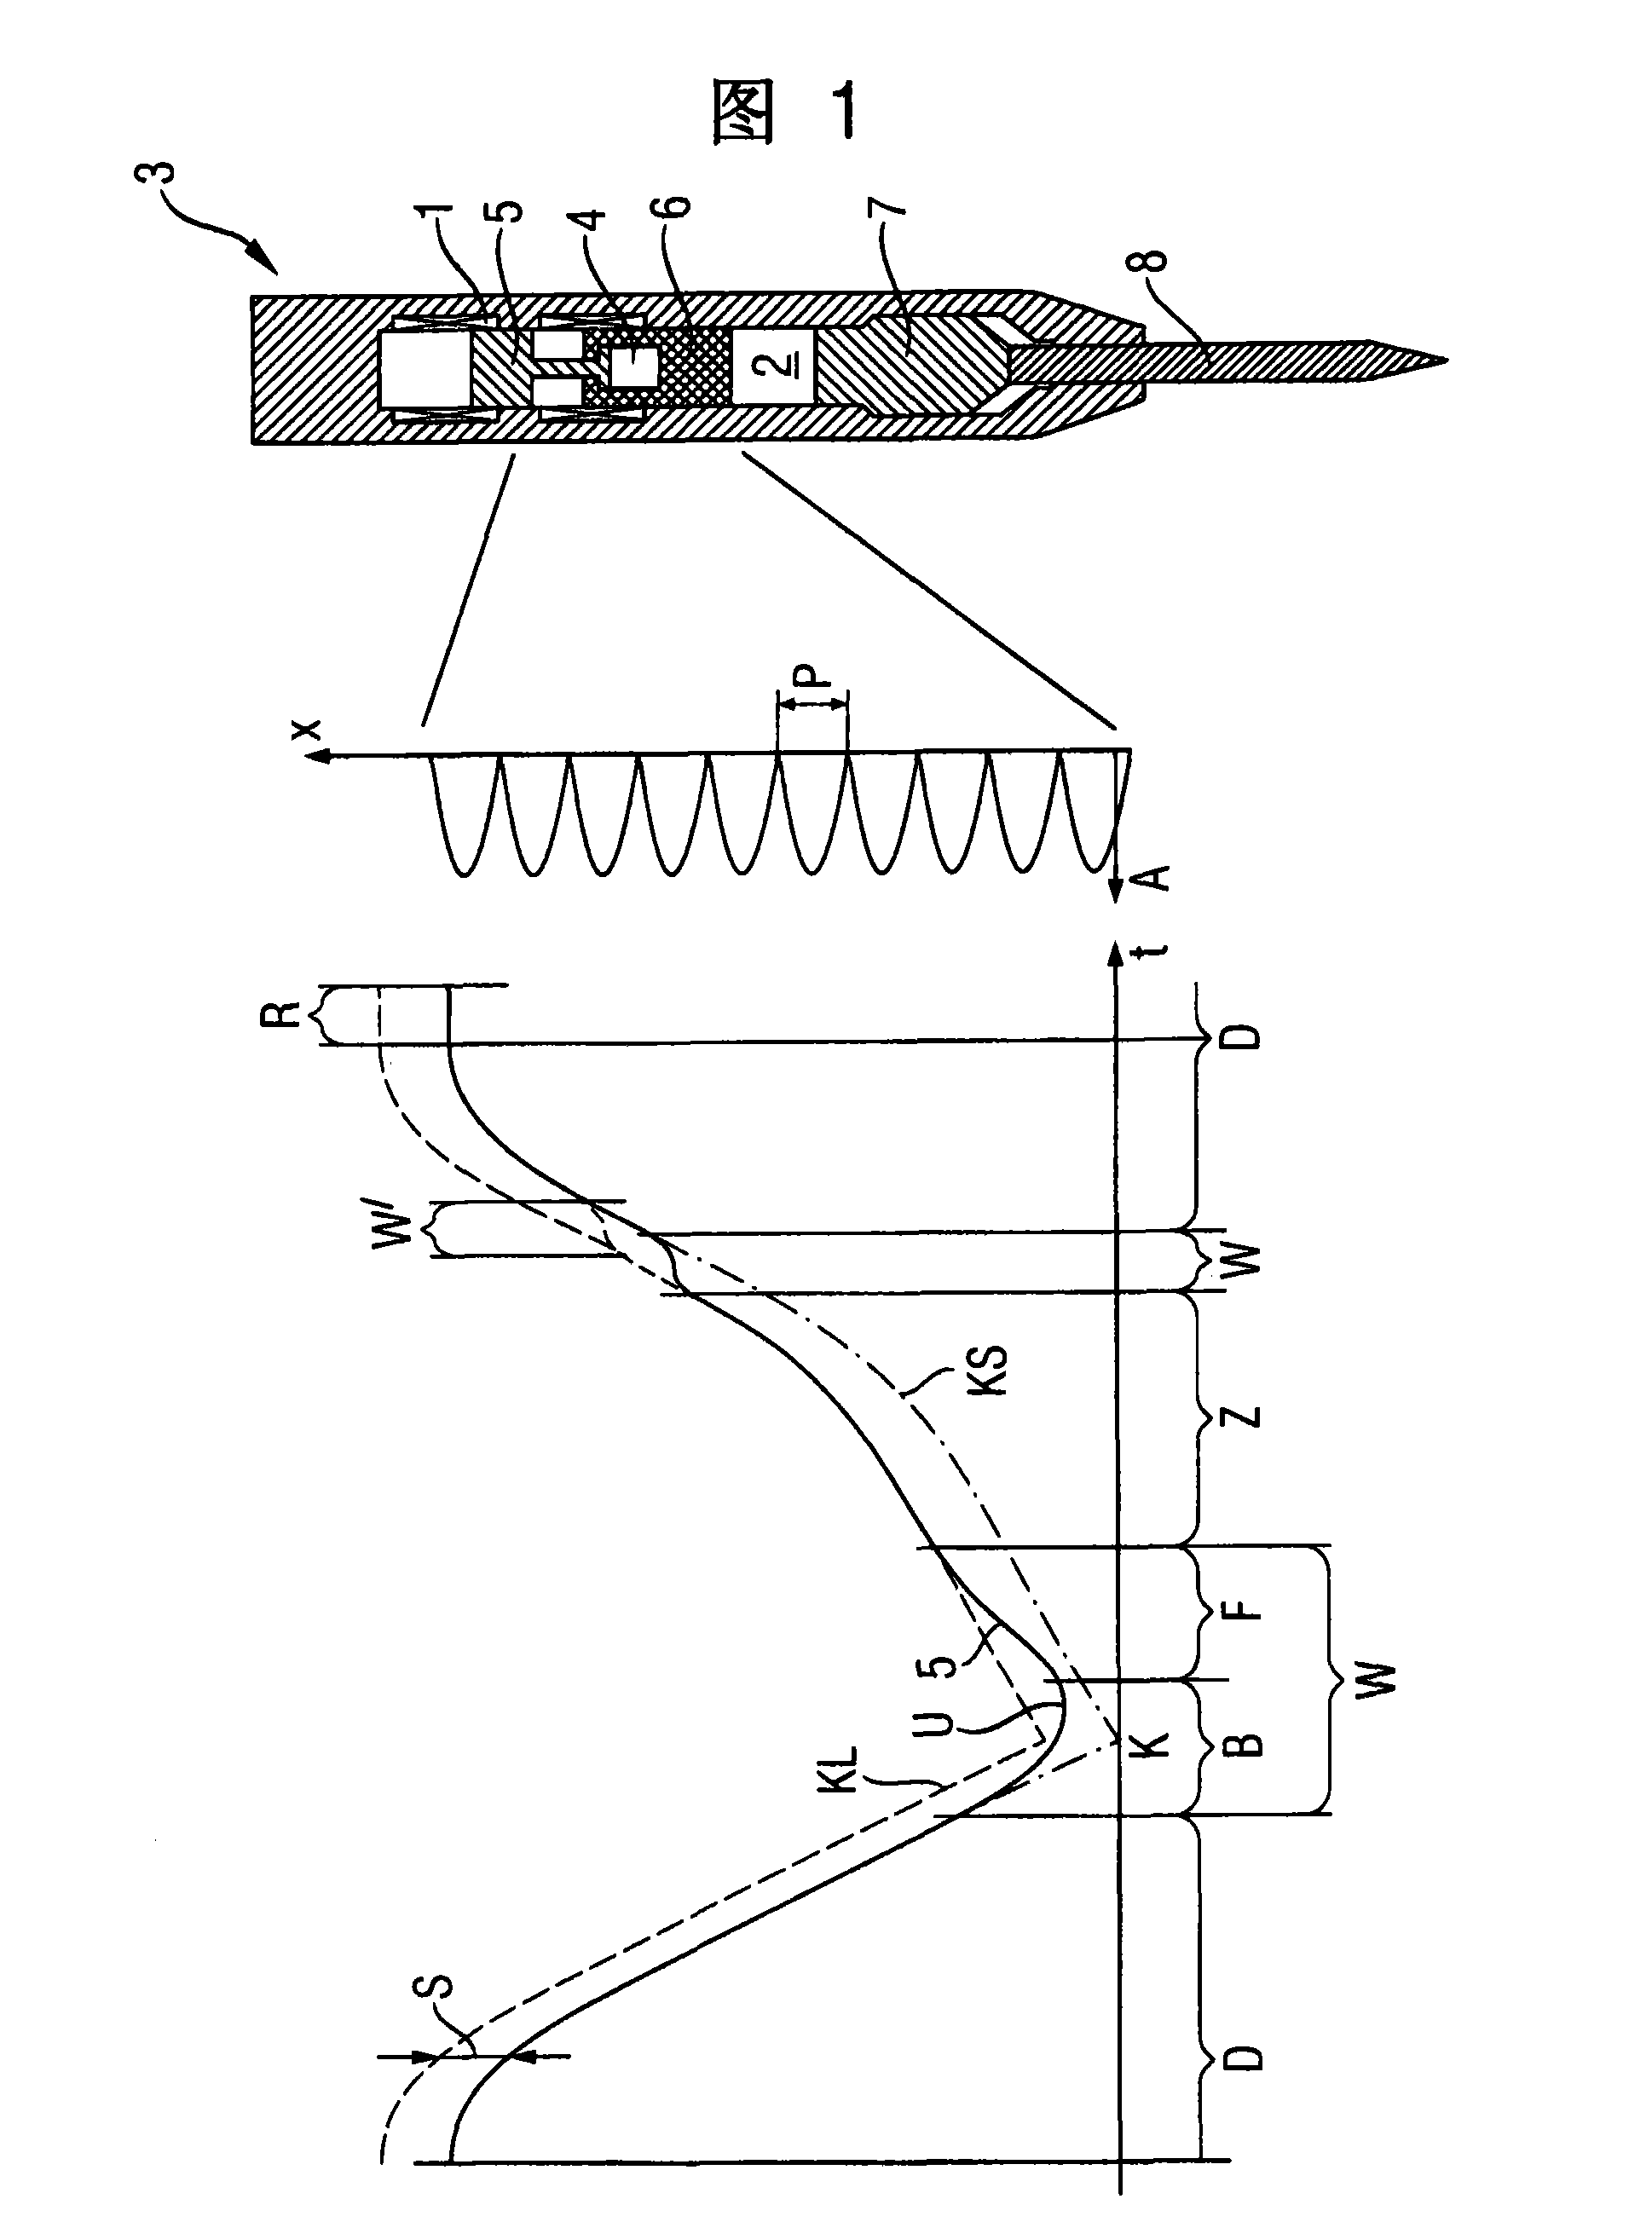 Method for controlling a linear motor for driving a striking mechanism